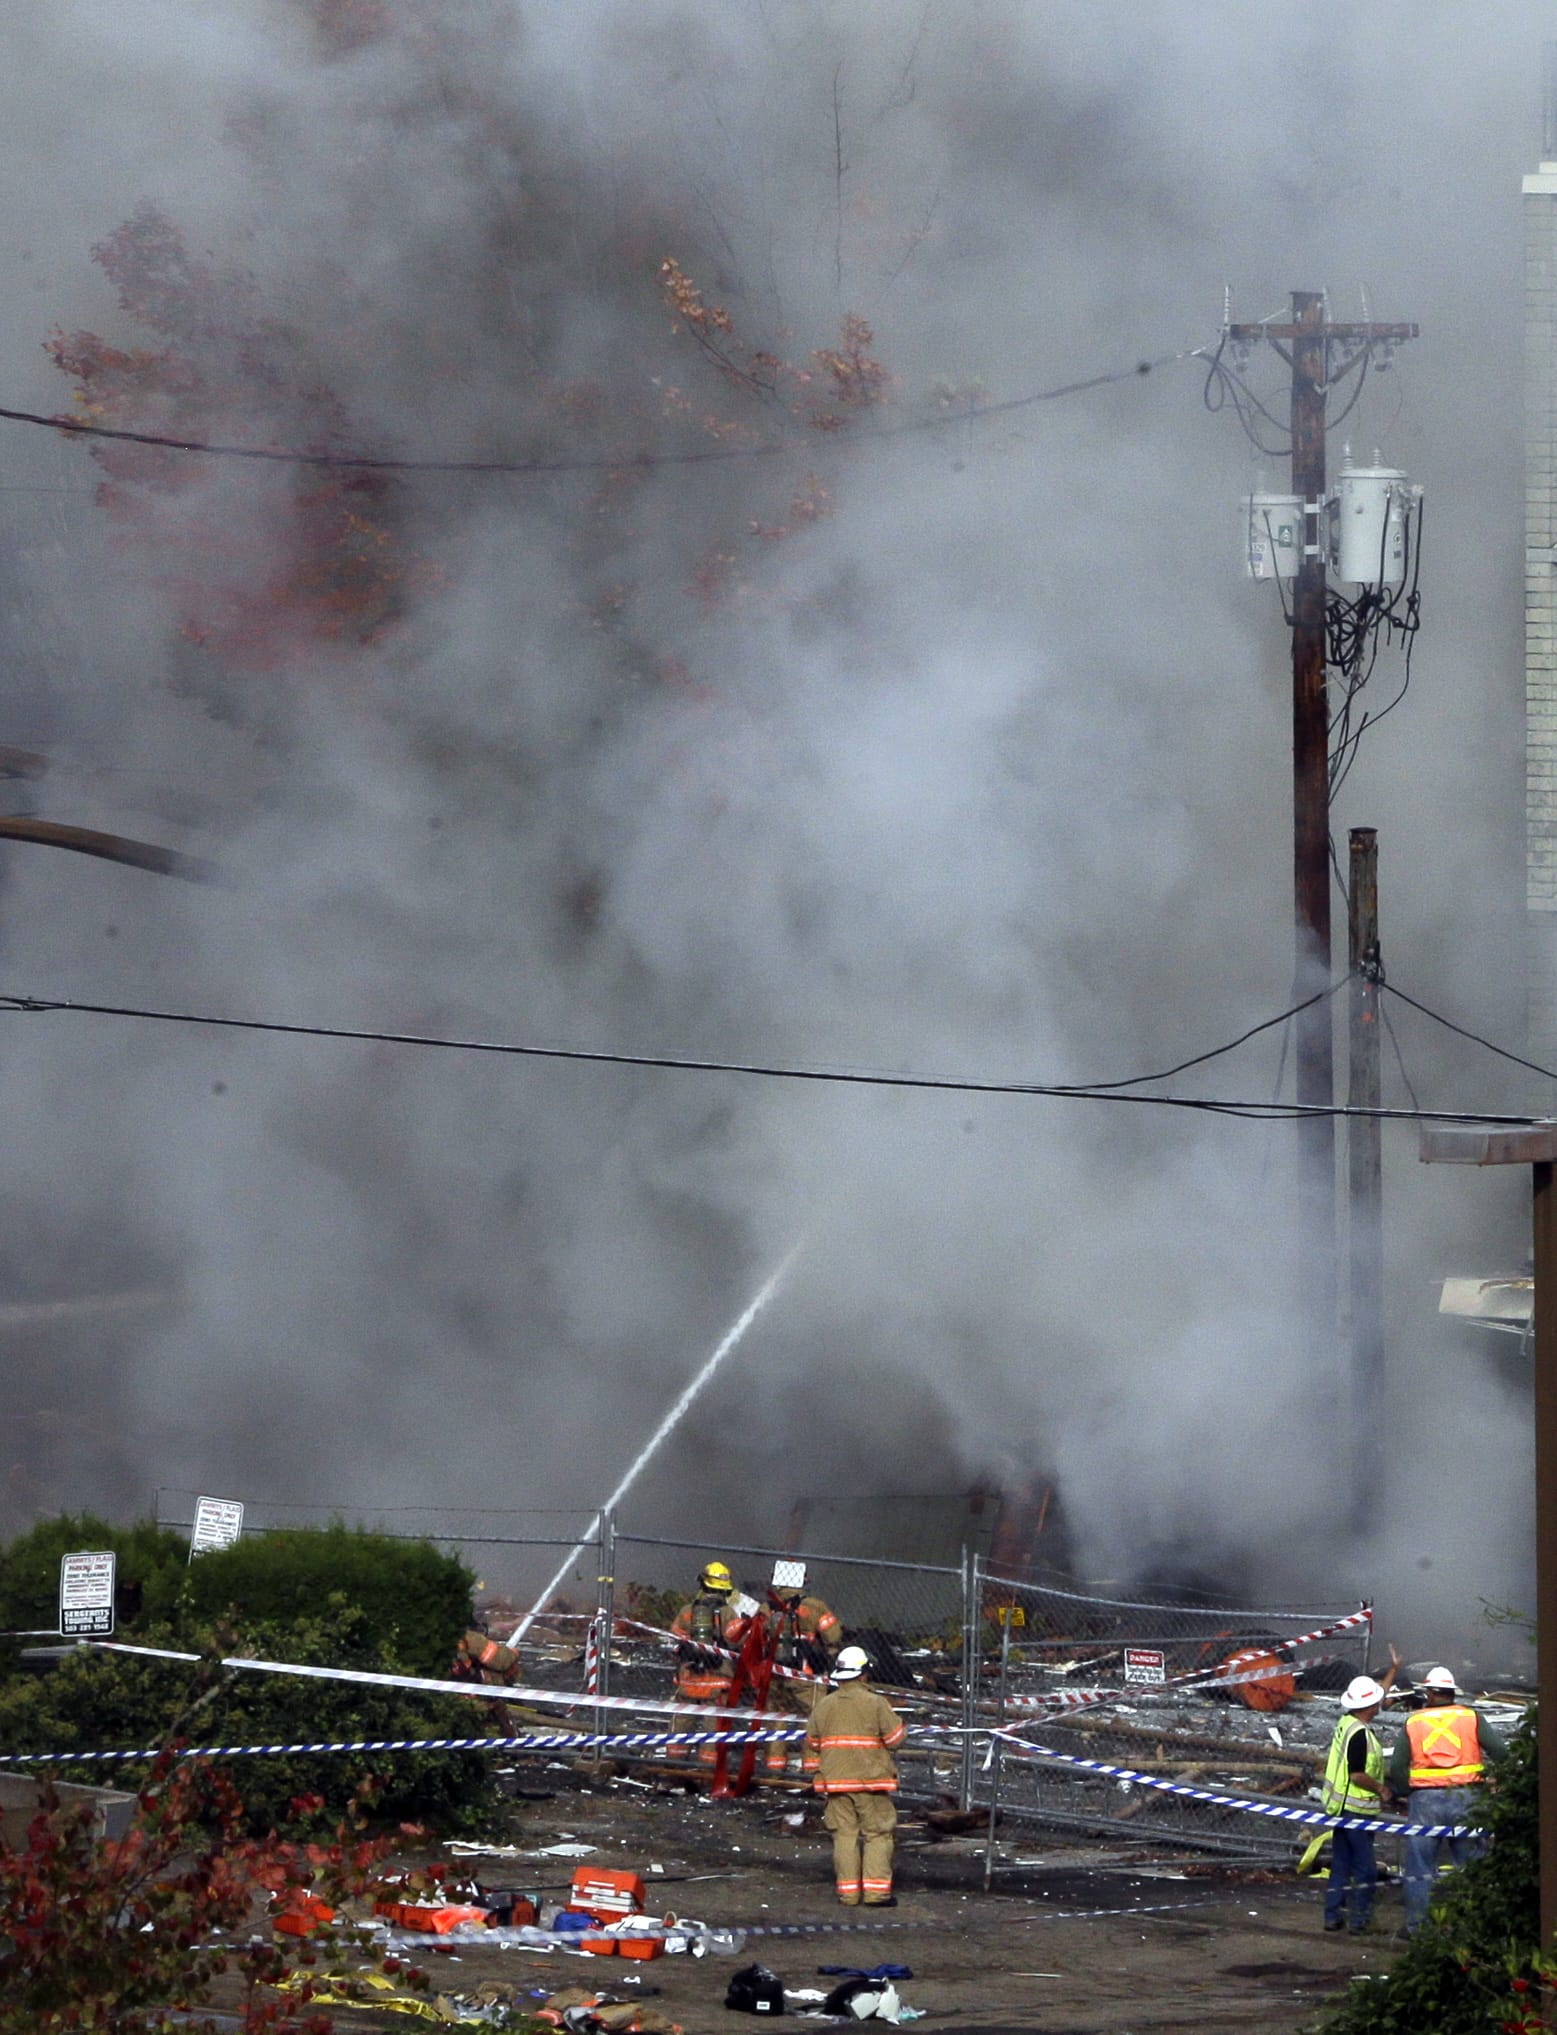 Smoke rises as firefighters battle a blaze after a gas explosion in Portland, Ore., Wednesday, Oct. 19, 2016. A powerful natural gas explosion that neighbors said felt like an earthquake rocked the busy injuring two firefighters and two civilians. One building in the popular shopping district was reduced to rubble and the exterior of one side of another building had been ripped off, its windows blown out.